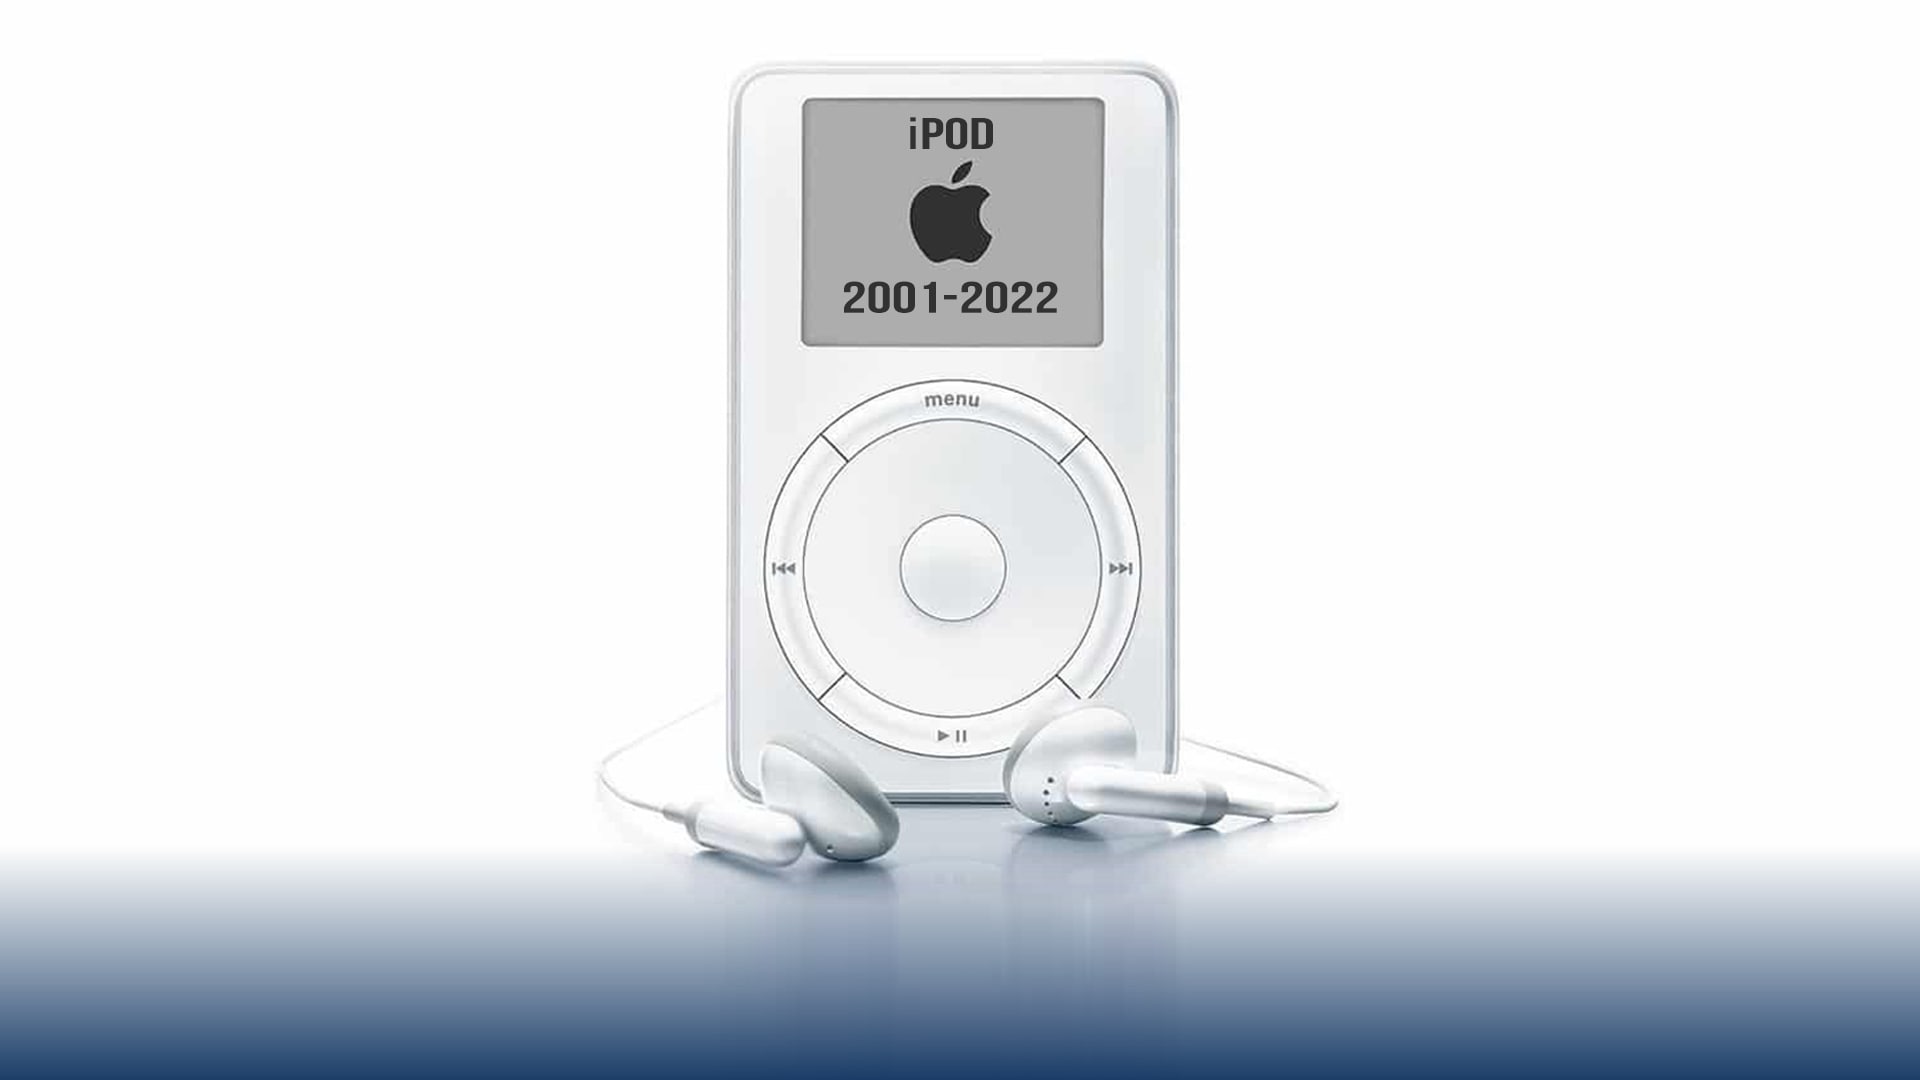 Apple Discontinues iPod After 20-year Run